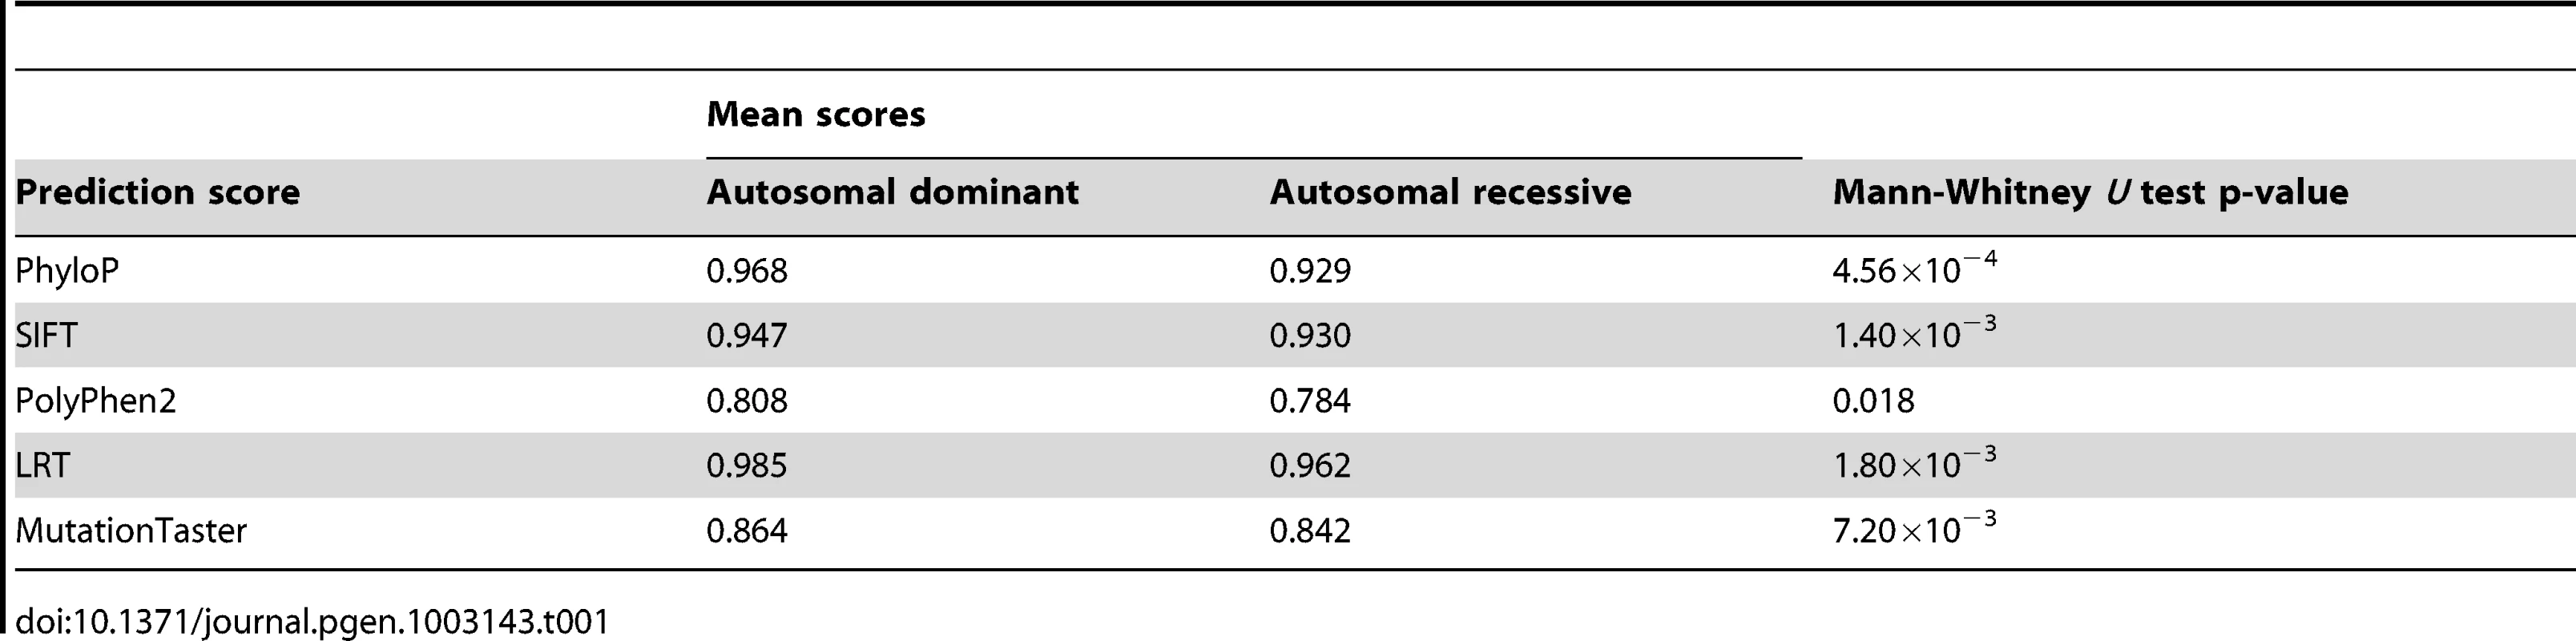 Mann–Whitney &lt;i&gt;U&lt;/i&gt; test &lt;i&gt;p&lt;/i&gt; values for the difference in prediction scores between autosomal dominant and autosomal recessive disease-causing mutations.